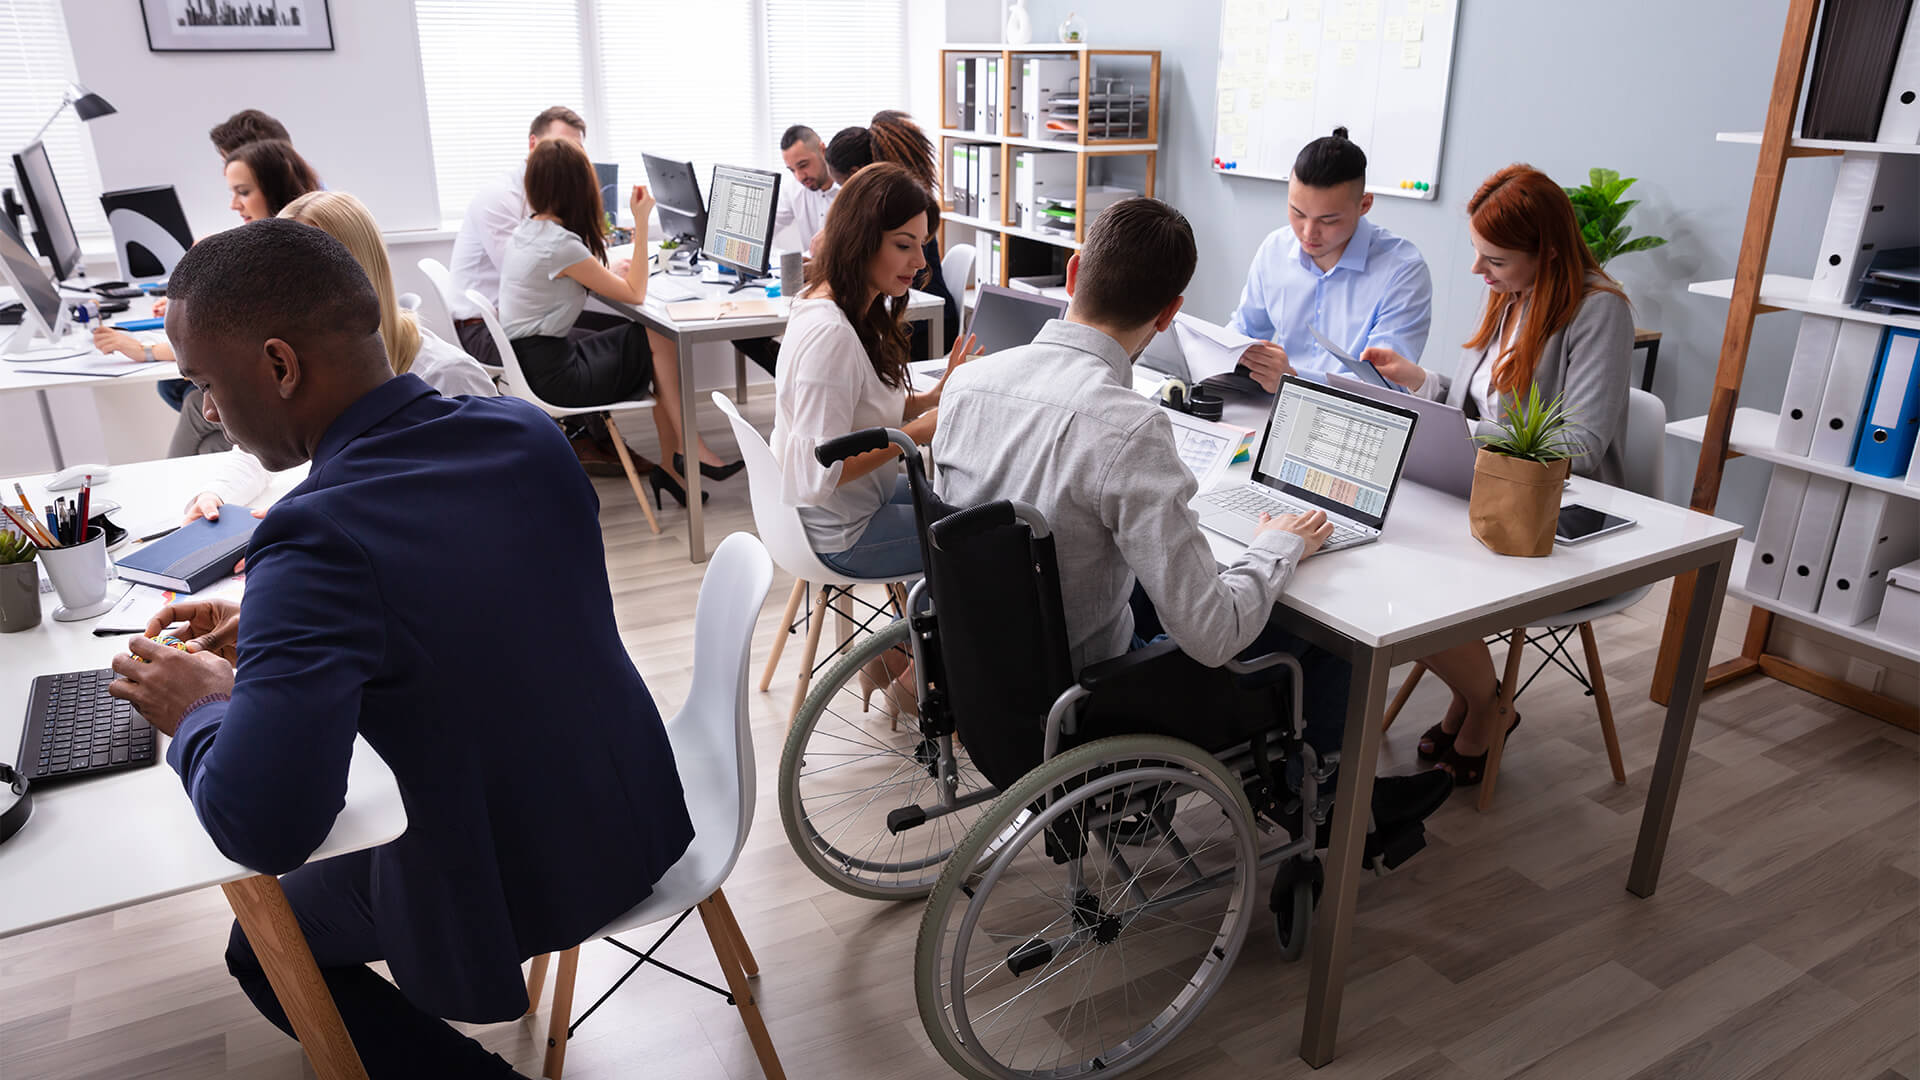 People working in an office, and the businessman closest to the camera using a wheelchair